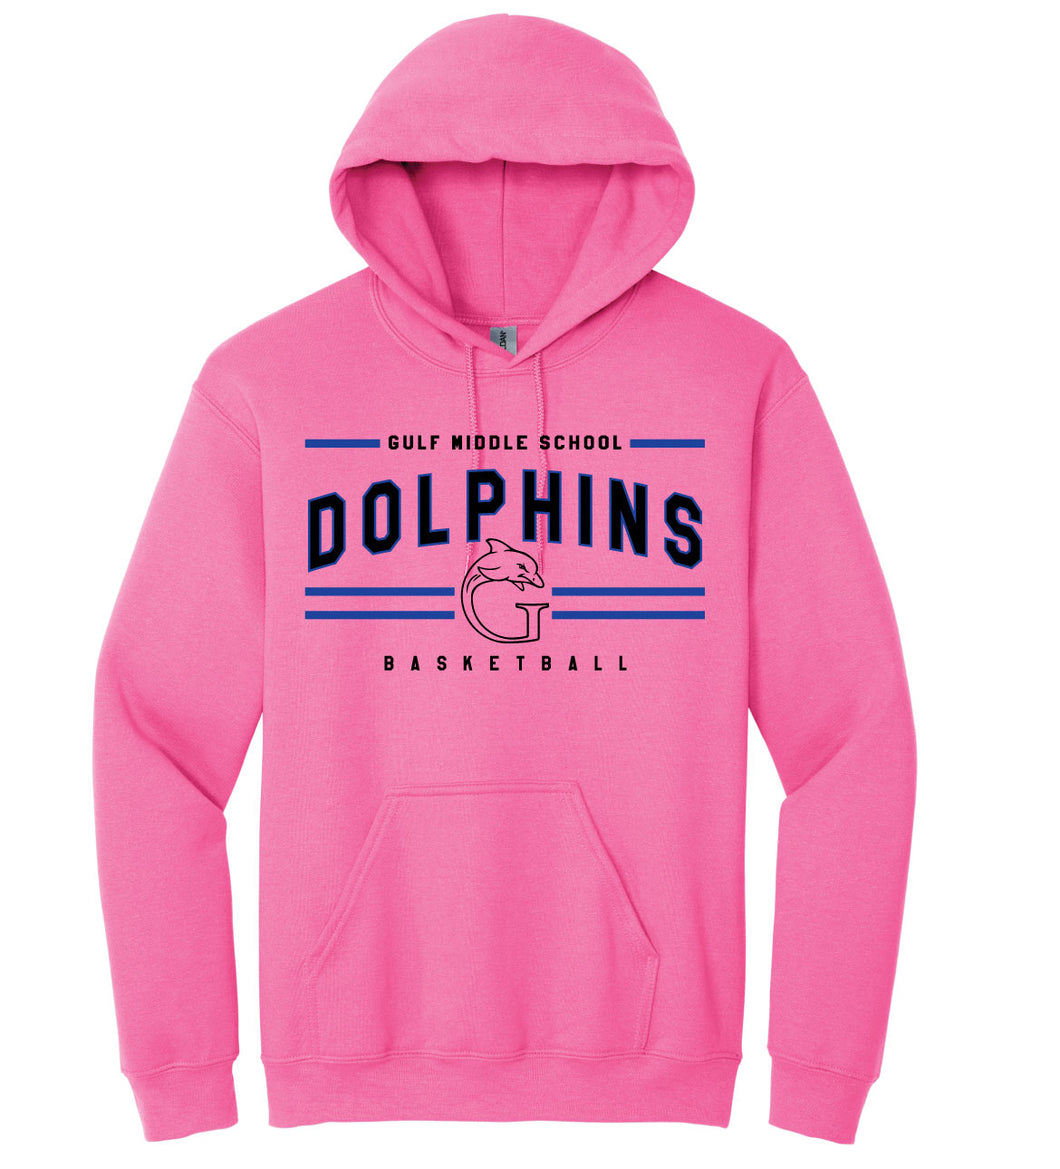 Youth Pink Cotton Hoodie